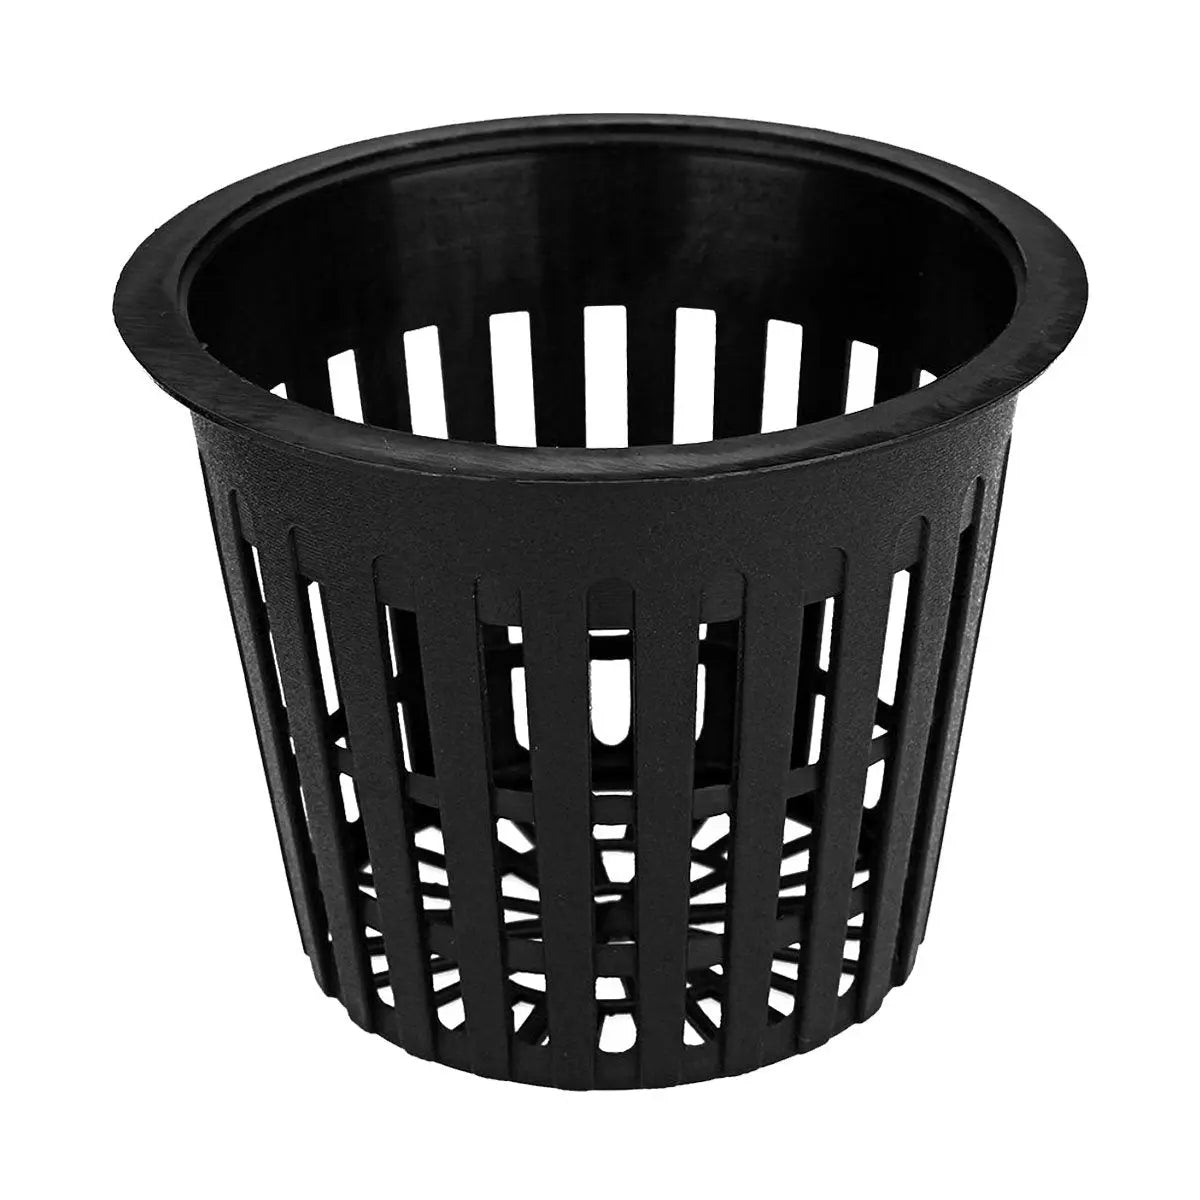 Mesh Baskets , 6 in, 8 in and 10 in standard 3.5 and 5 gallon buckets ...